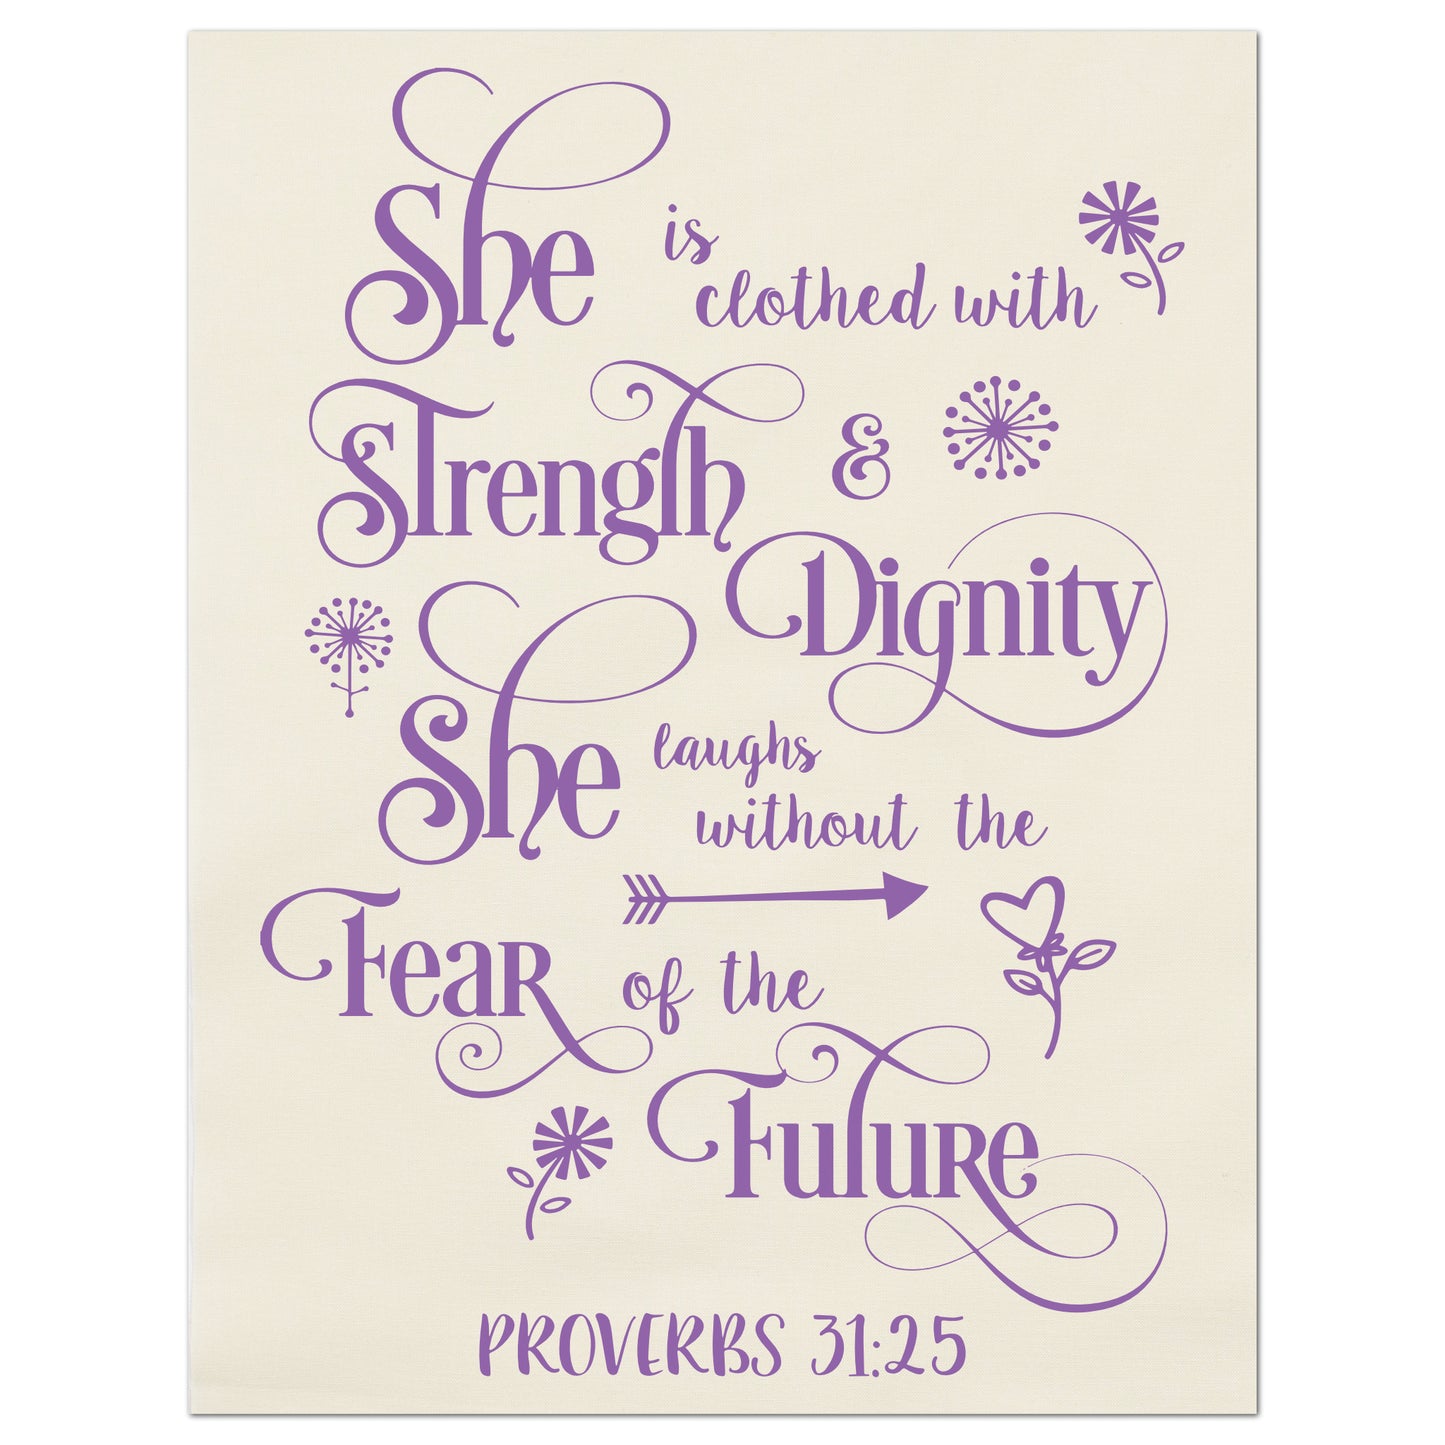 She is clothed with strength and dignity.  She Laughs without the fear of the future - Proverbs 31:25 - Fabric Panel Print, Quilt Block, Religious, Scripture, Christian